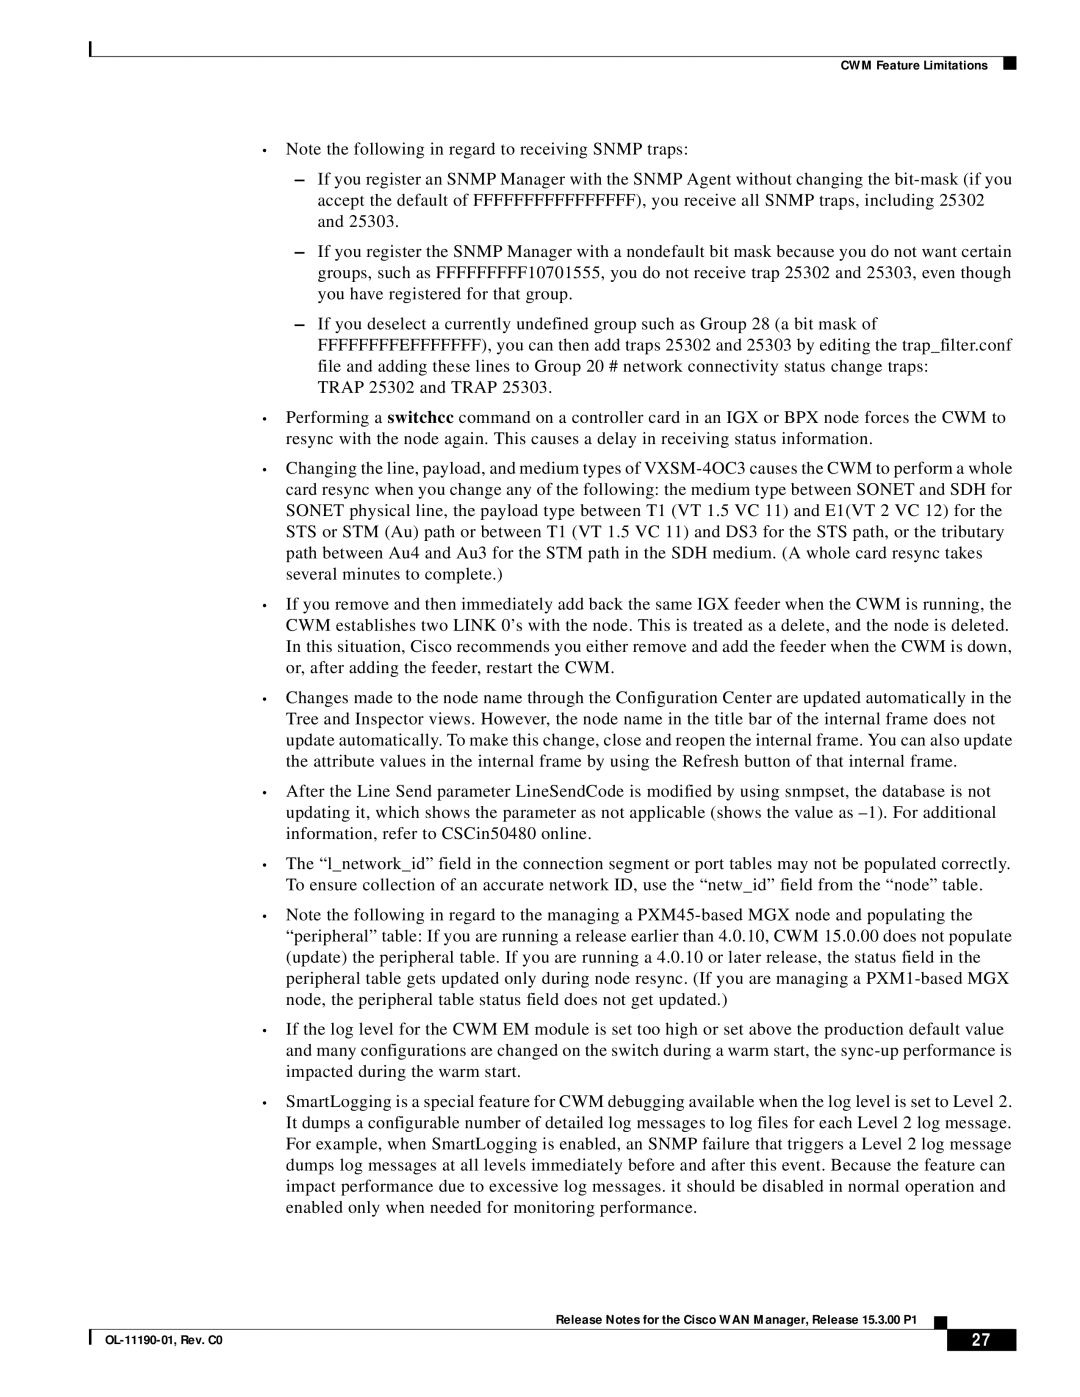 Cisco Systems 15.3.00P1 manual Note the following in regard to receiving SNMP traps 